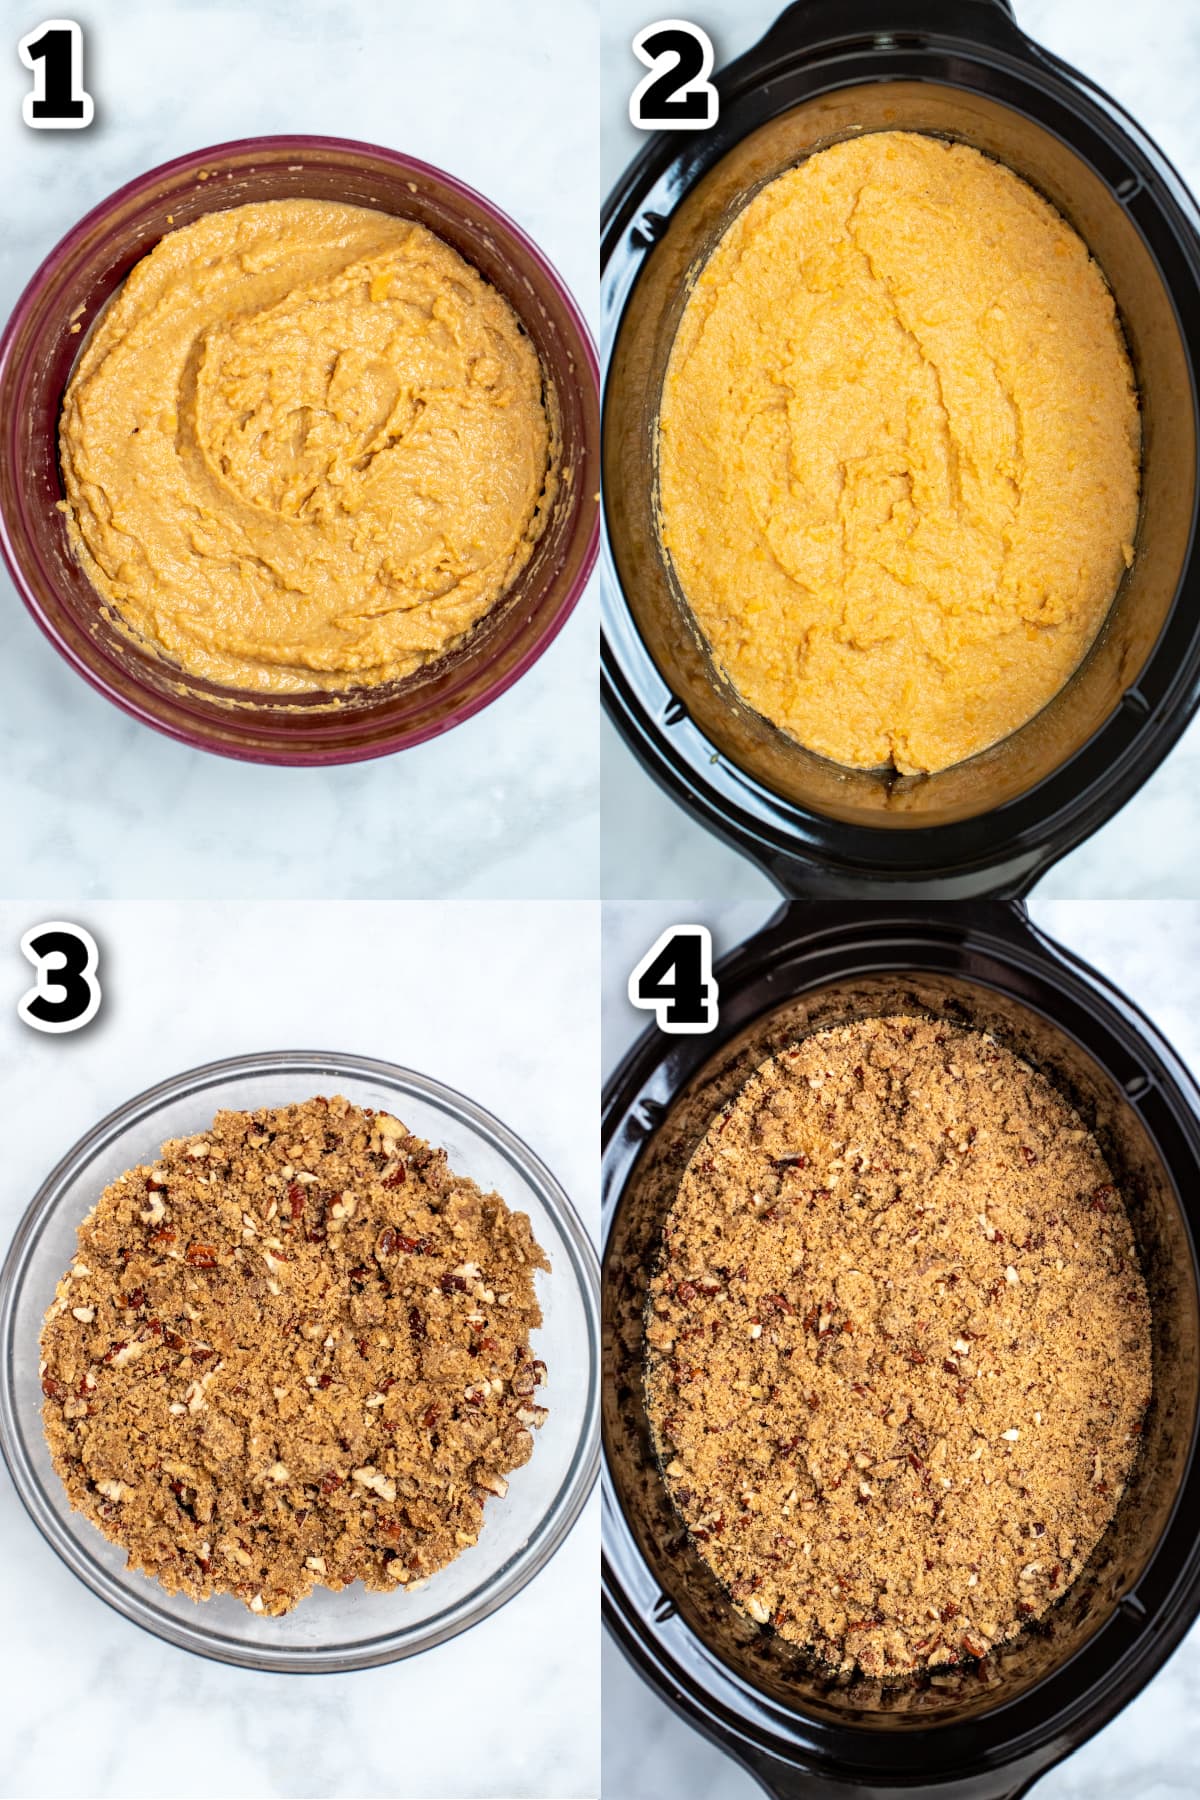 Step by step instructions for how to make crockpot sweet potato casserole.